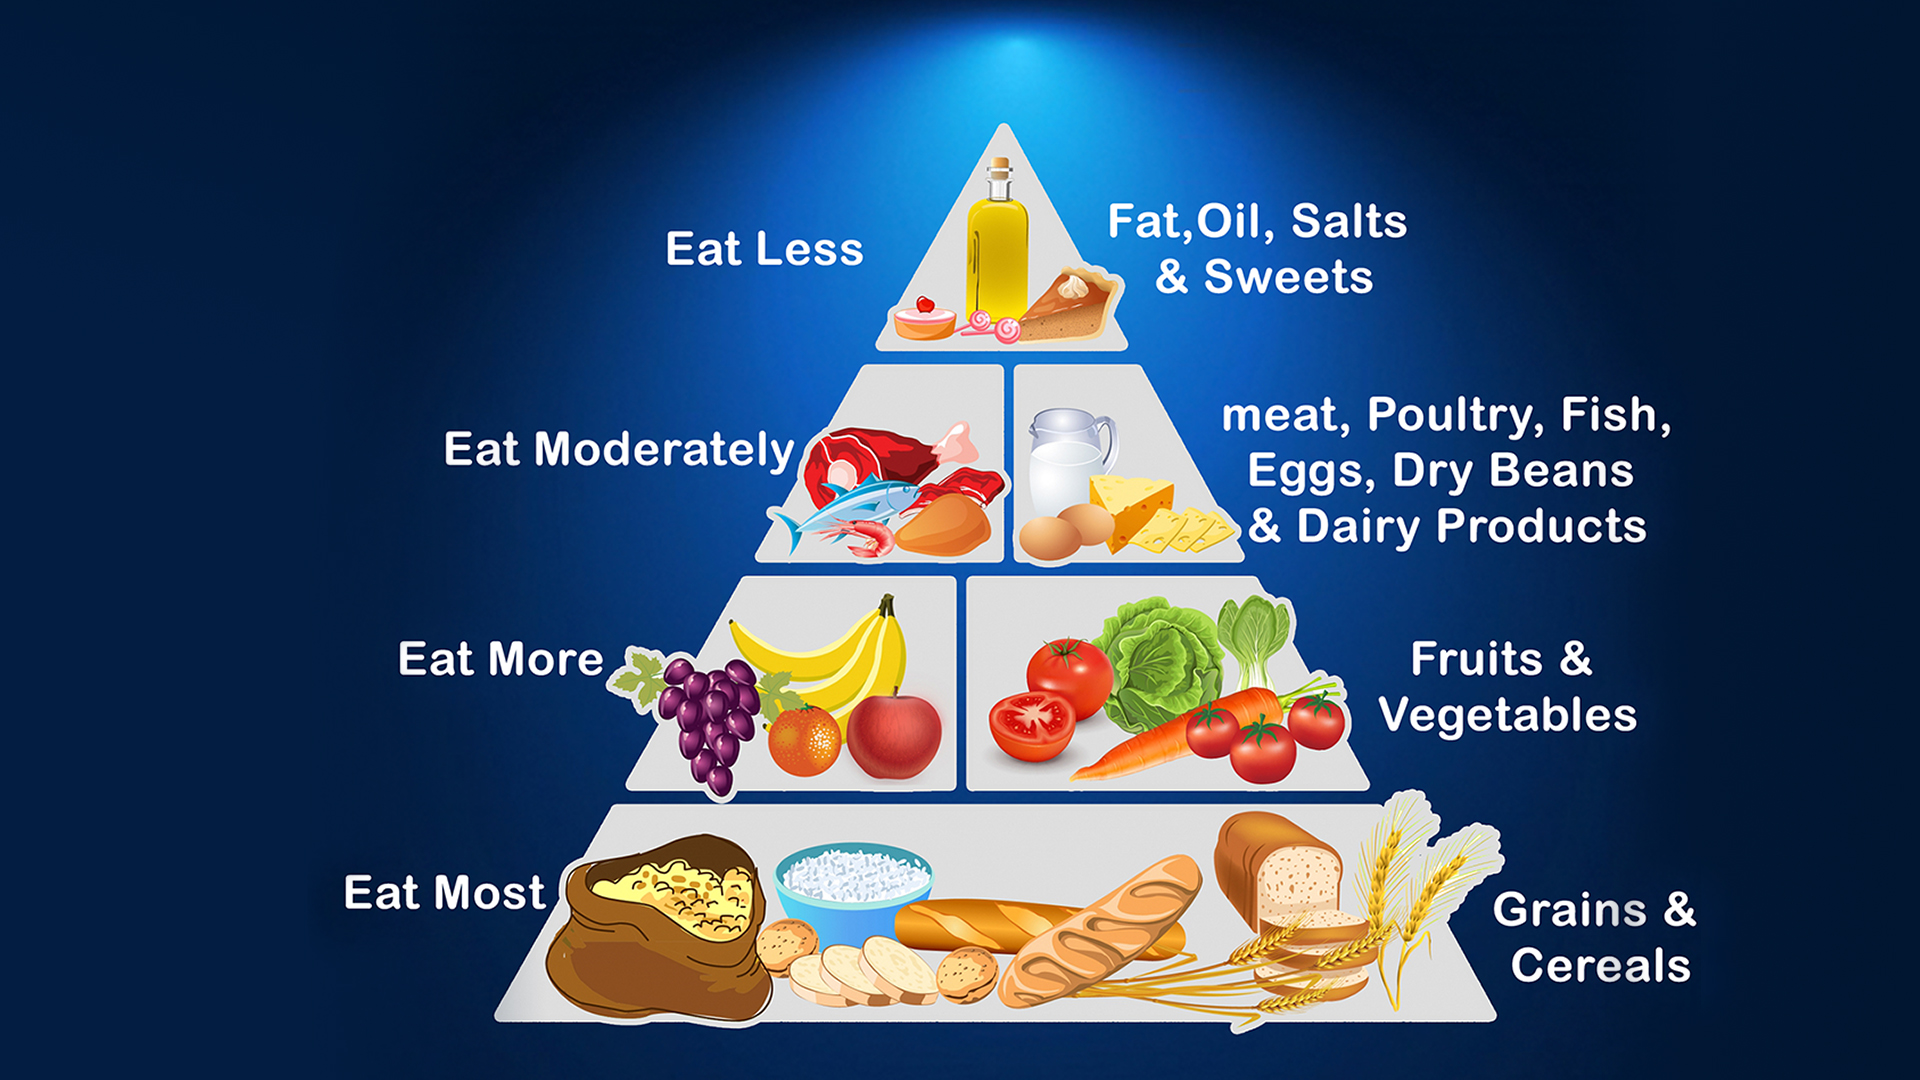 Fats And Oils Food Group